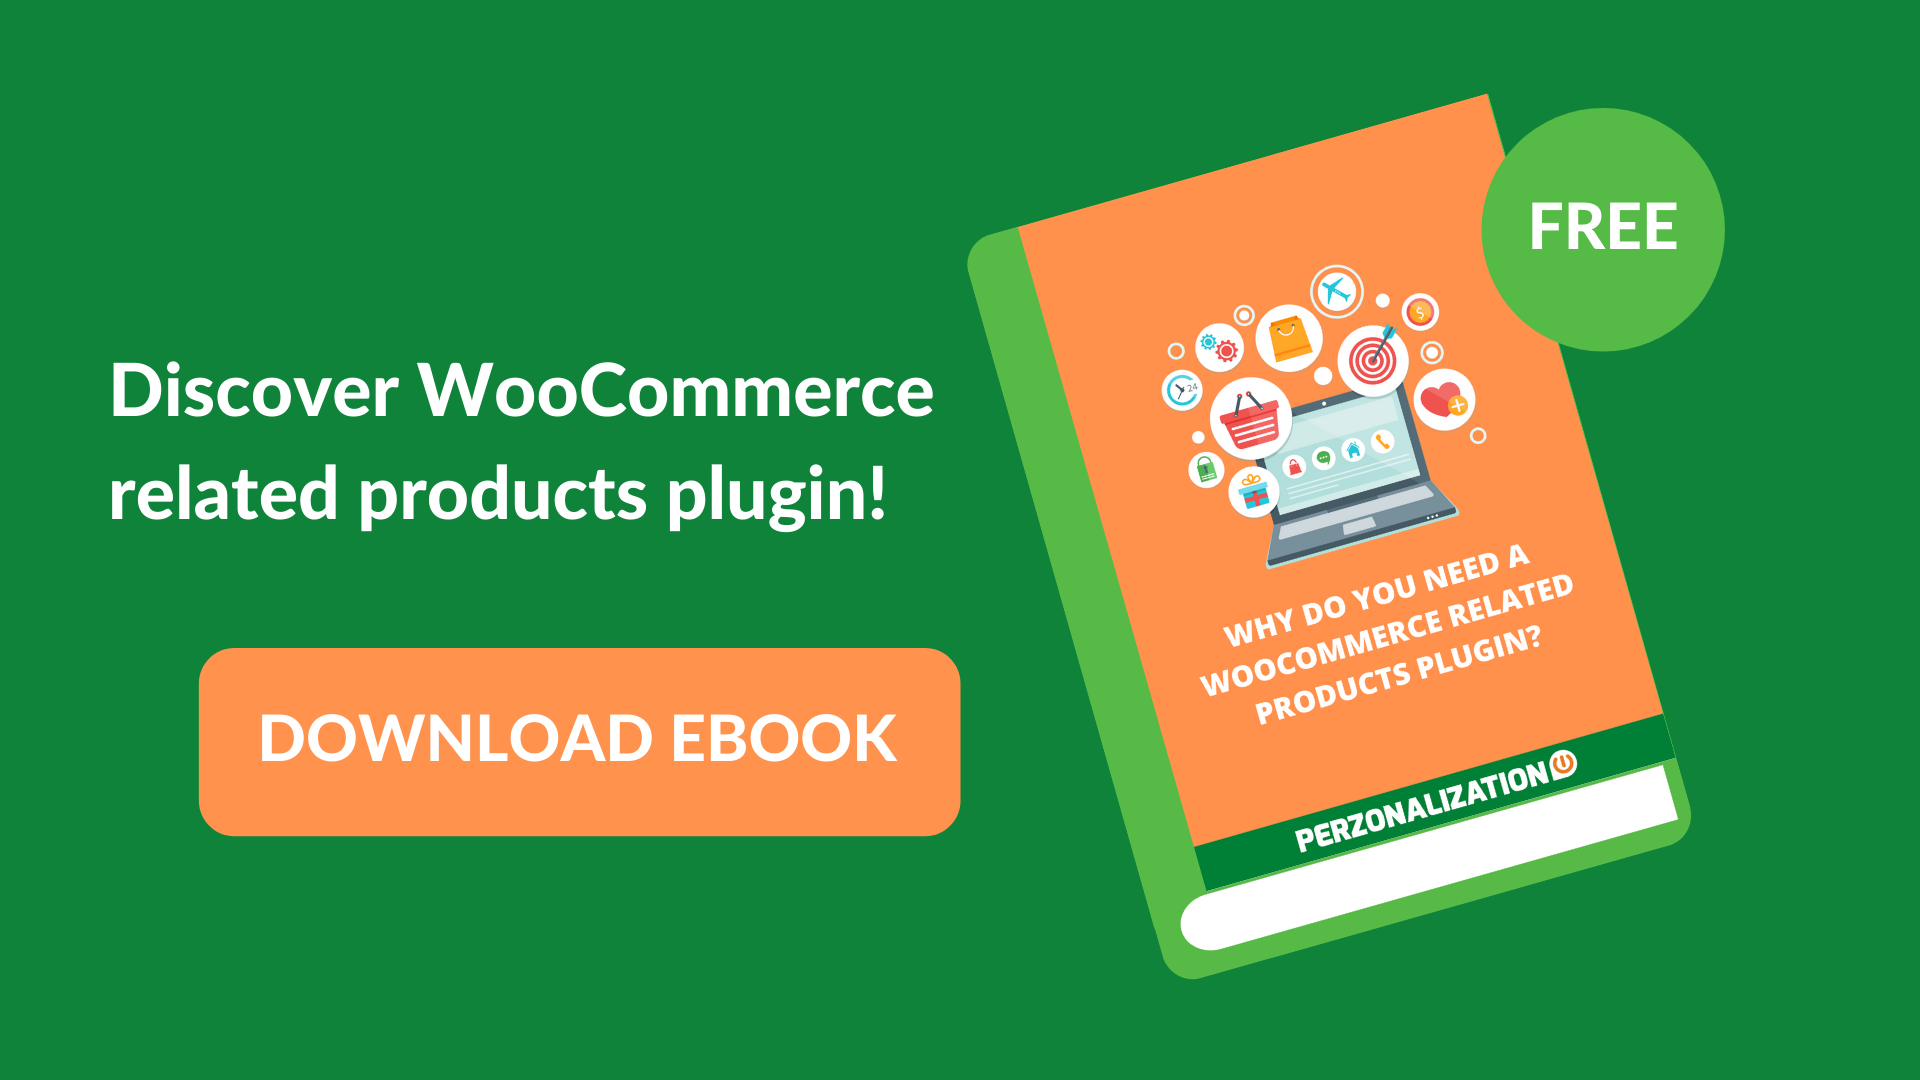 Perzonalization WooCommerce Related Products Plugin Free Download, Easy Integration, Free Trial for 14 days. Personalized Recommendations to Boost Sales. All in this free ebook